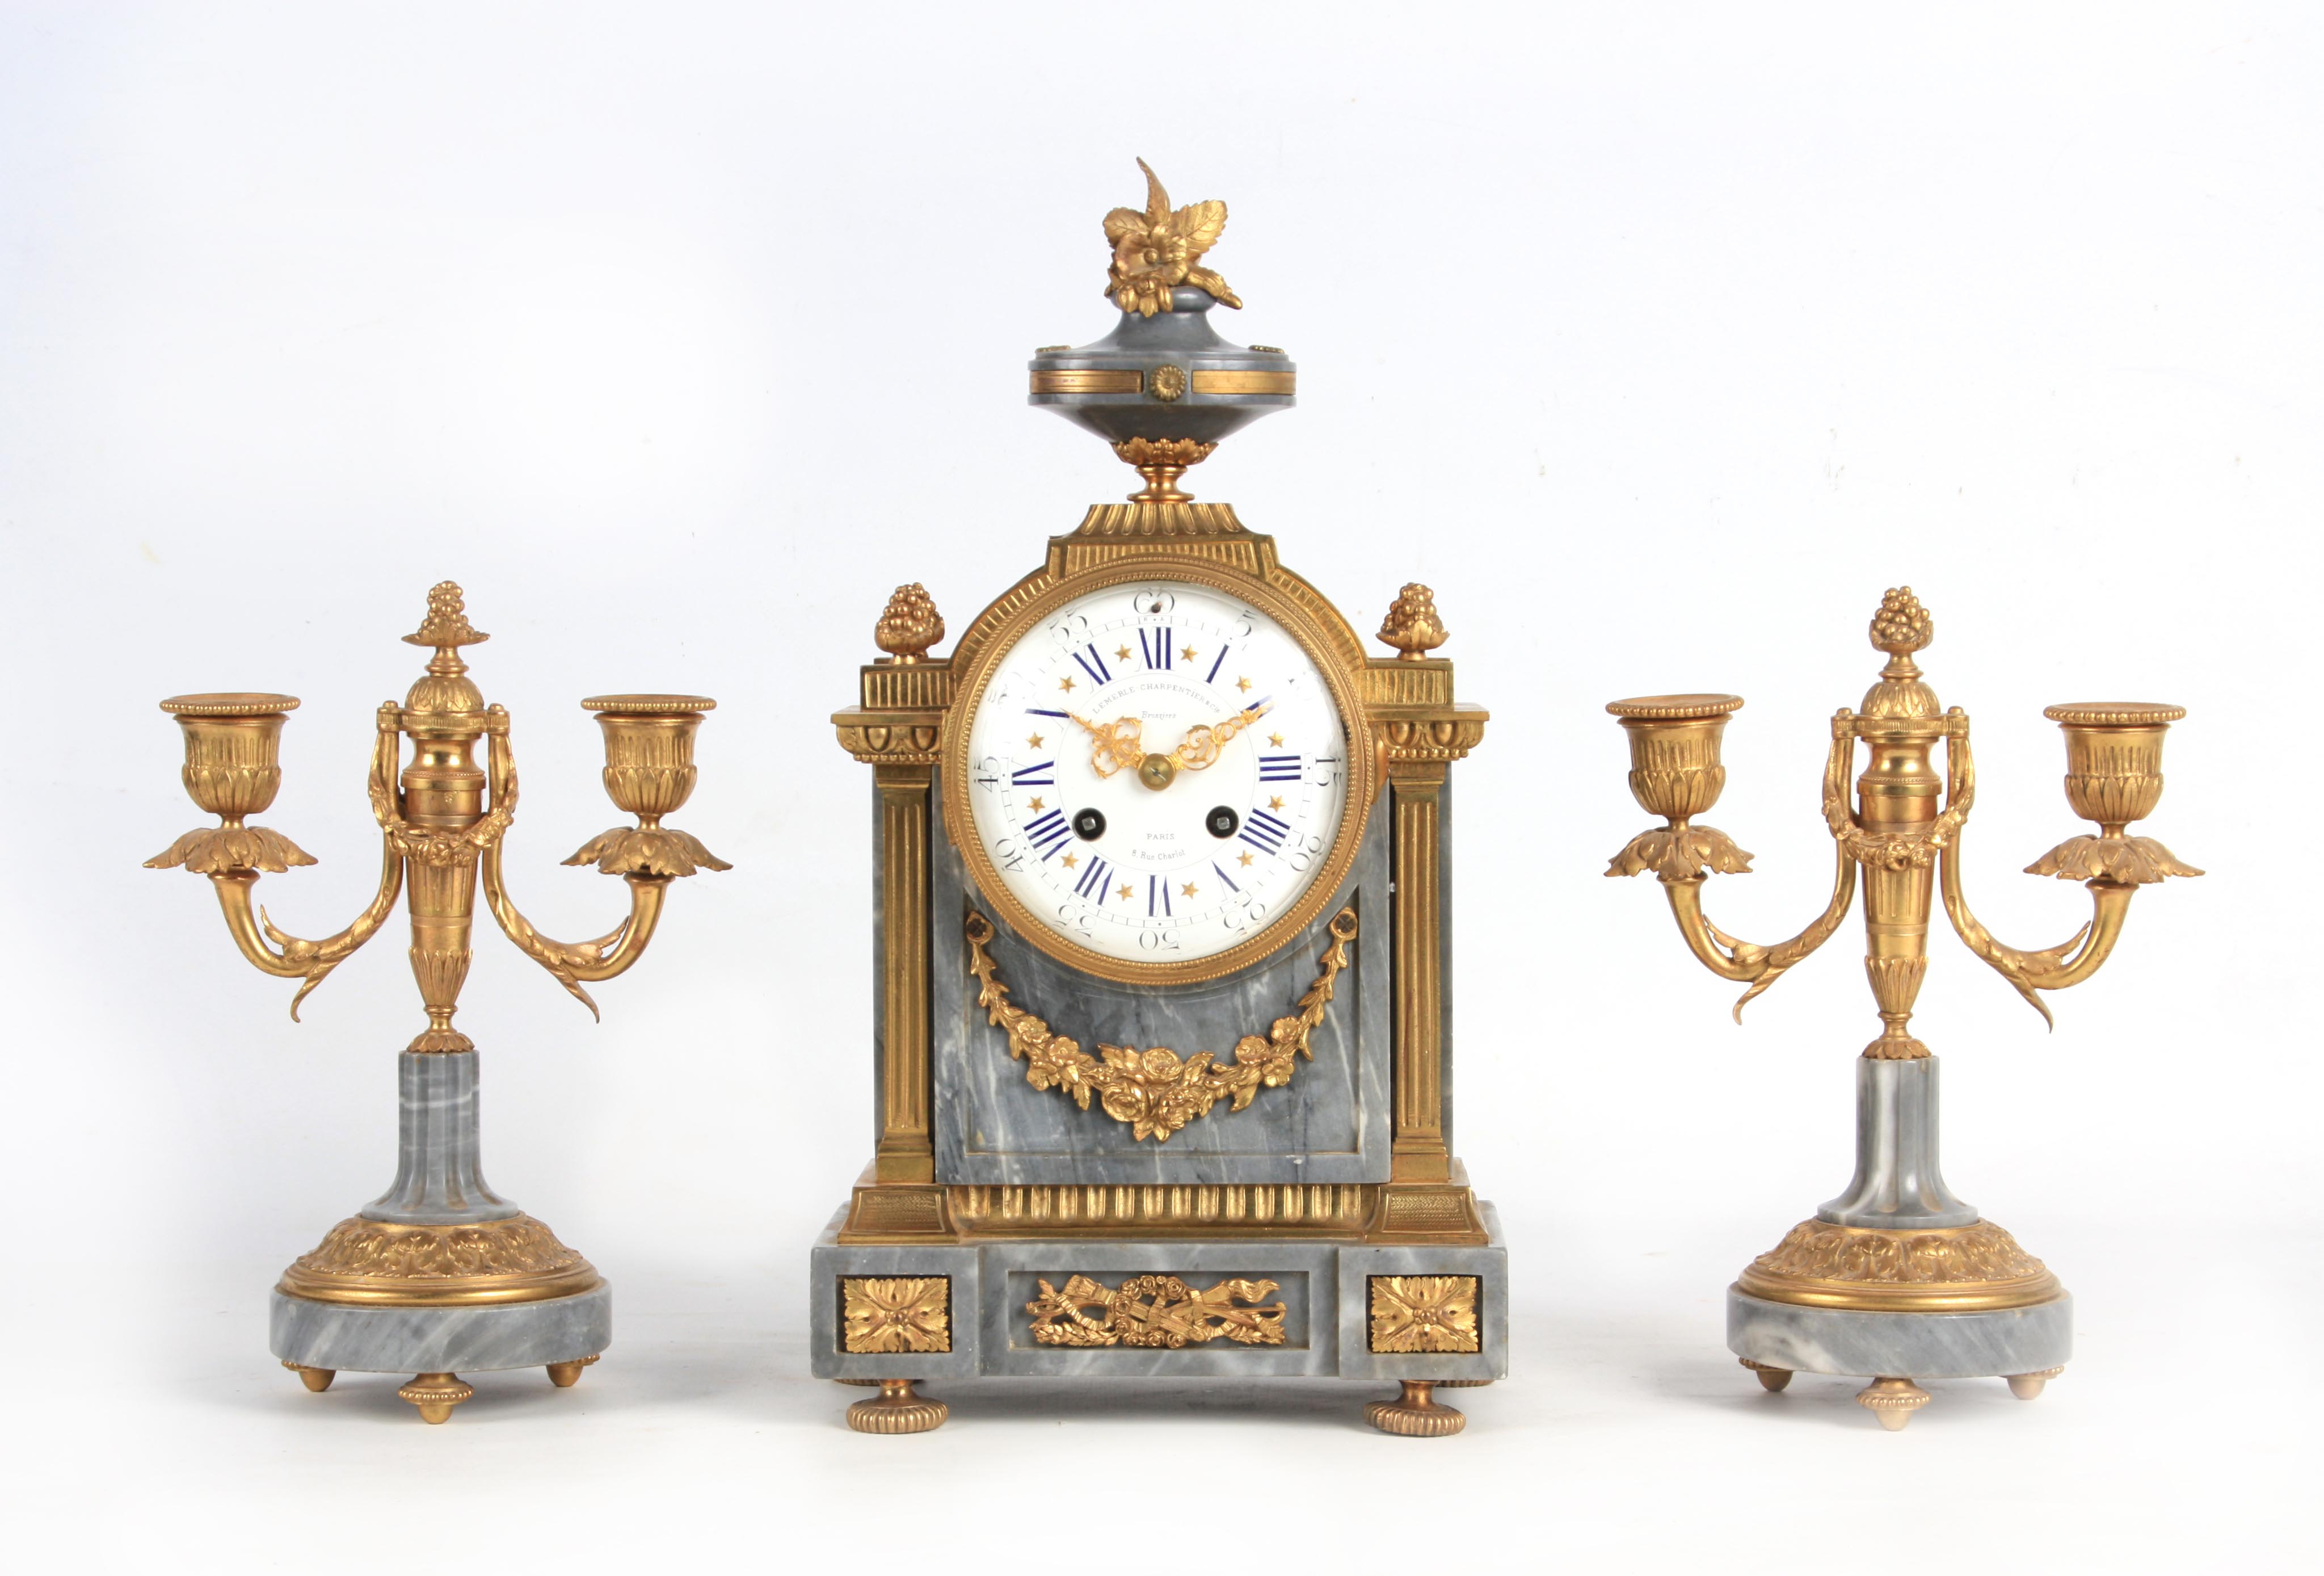 LEMERLE-CHARPENTIER & CIE, PARIS A MID 19TH CENTURY FRENCH MARBLE AND ORMOLU CLOCK GARNITURE the